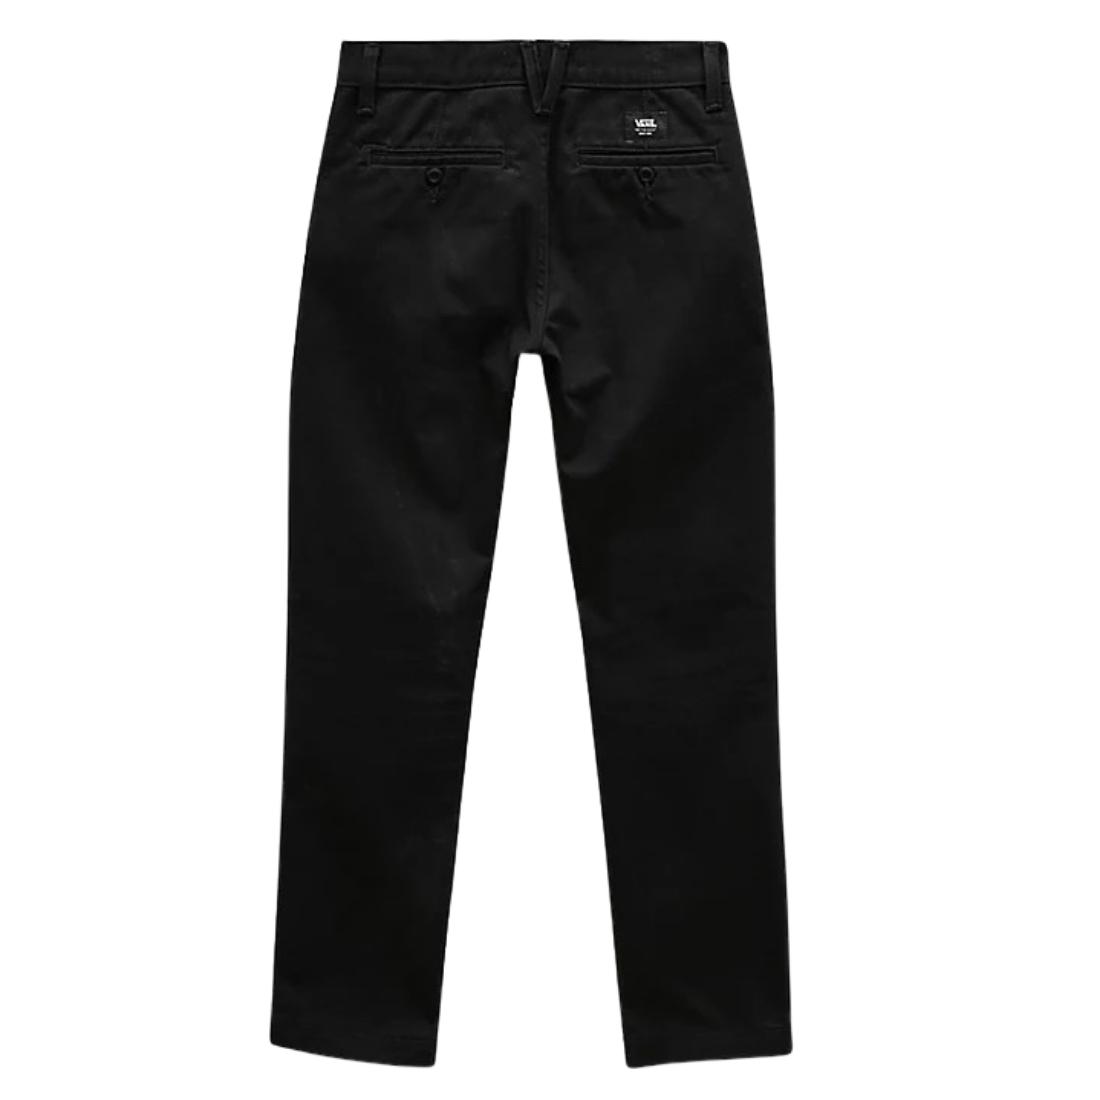 Vans Kids Authentic Chino Trousers - Black - Boys Chino Pants/Trousers by Vans